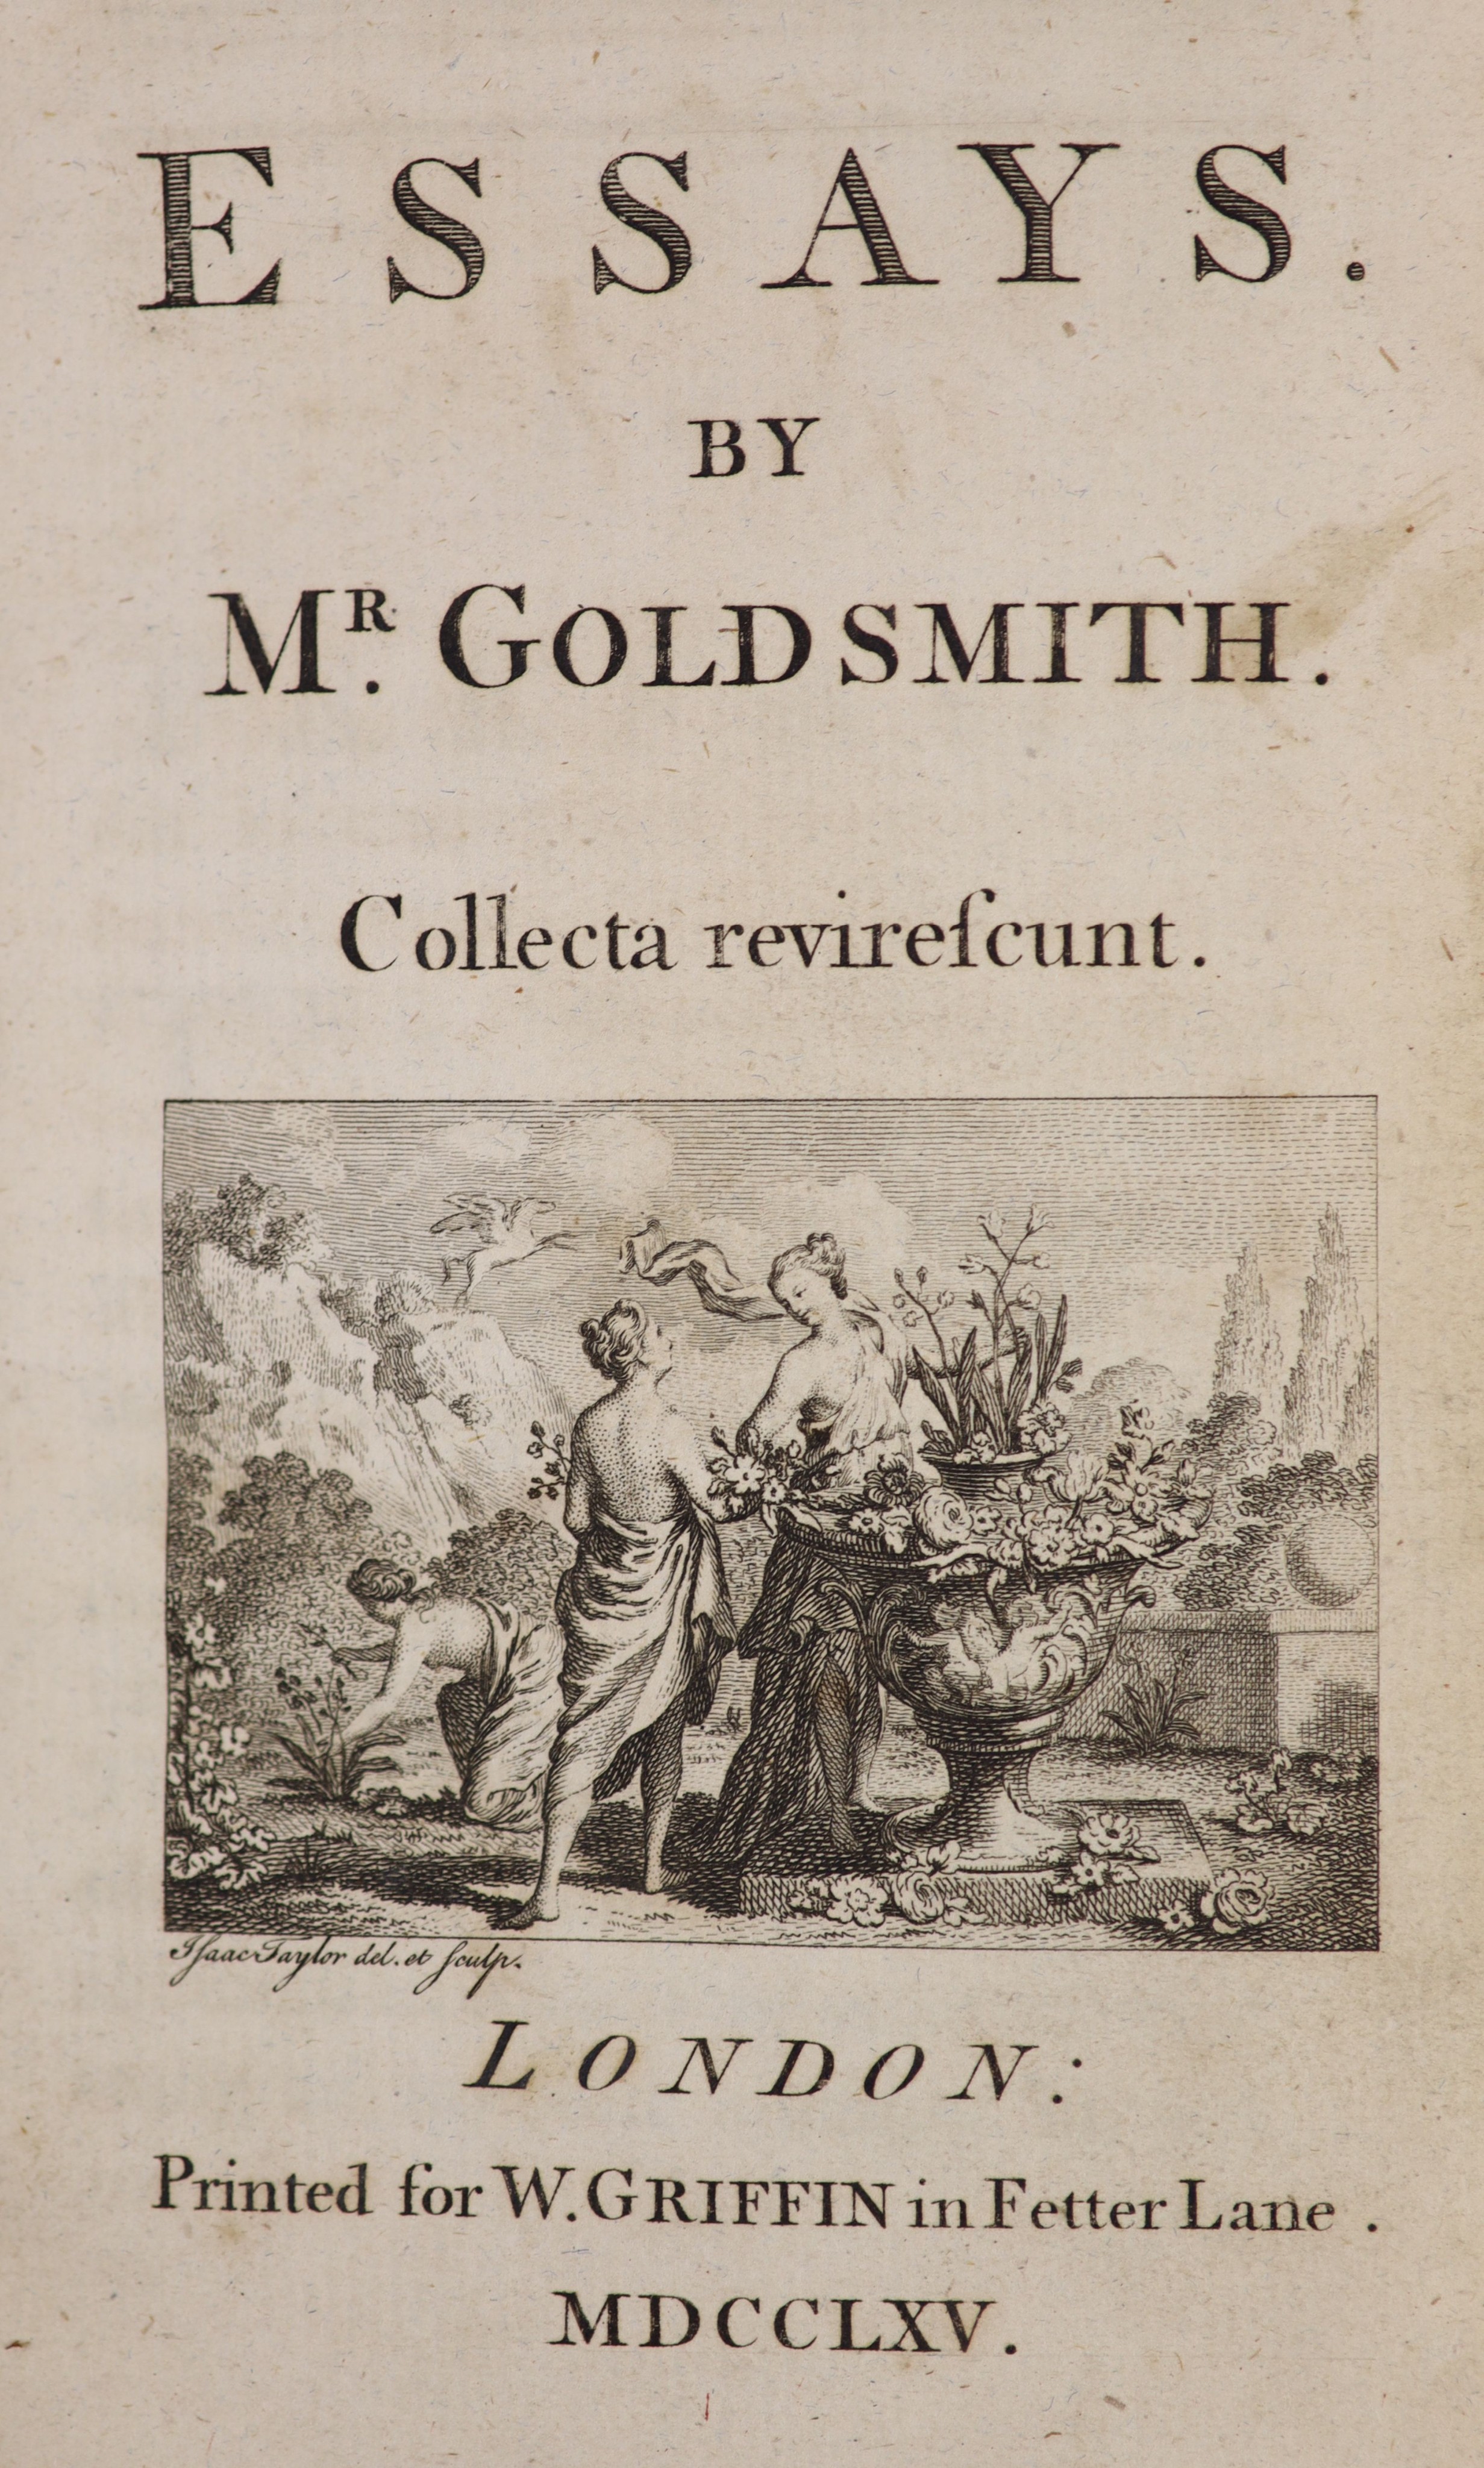 Goldsmith, Mr. Oliver - Essays. Collecta revirescunt. 1st edition with engraved title page vignette. Half calf and old marbled boards, gilt panelled spine. W. Griffin, London, 1765.